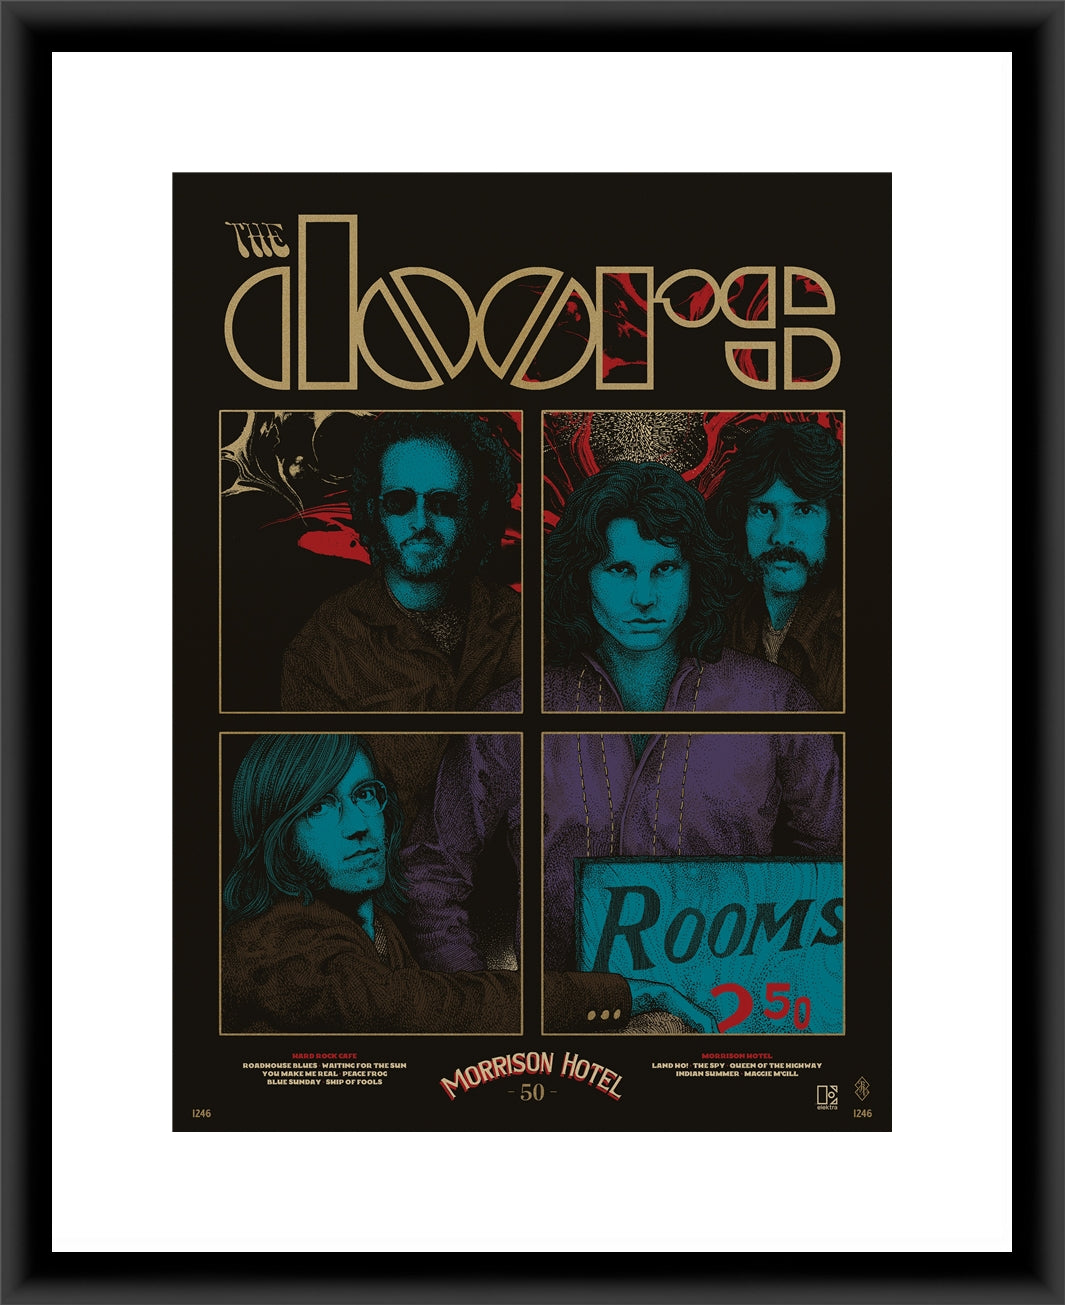 The Doors Morrison Hotel Print by Richey Beckett (Roadhouse Blues Edition)